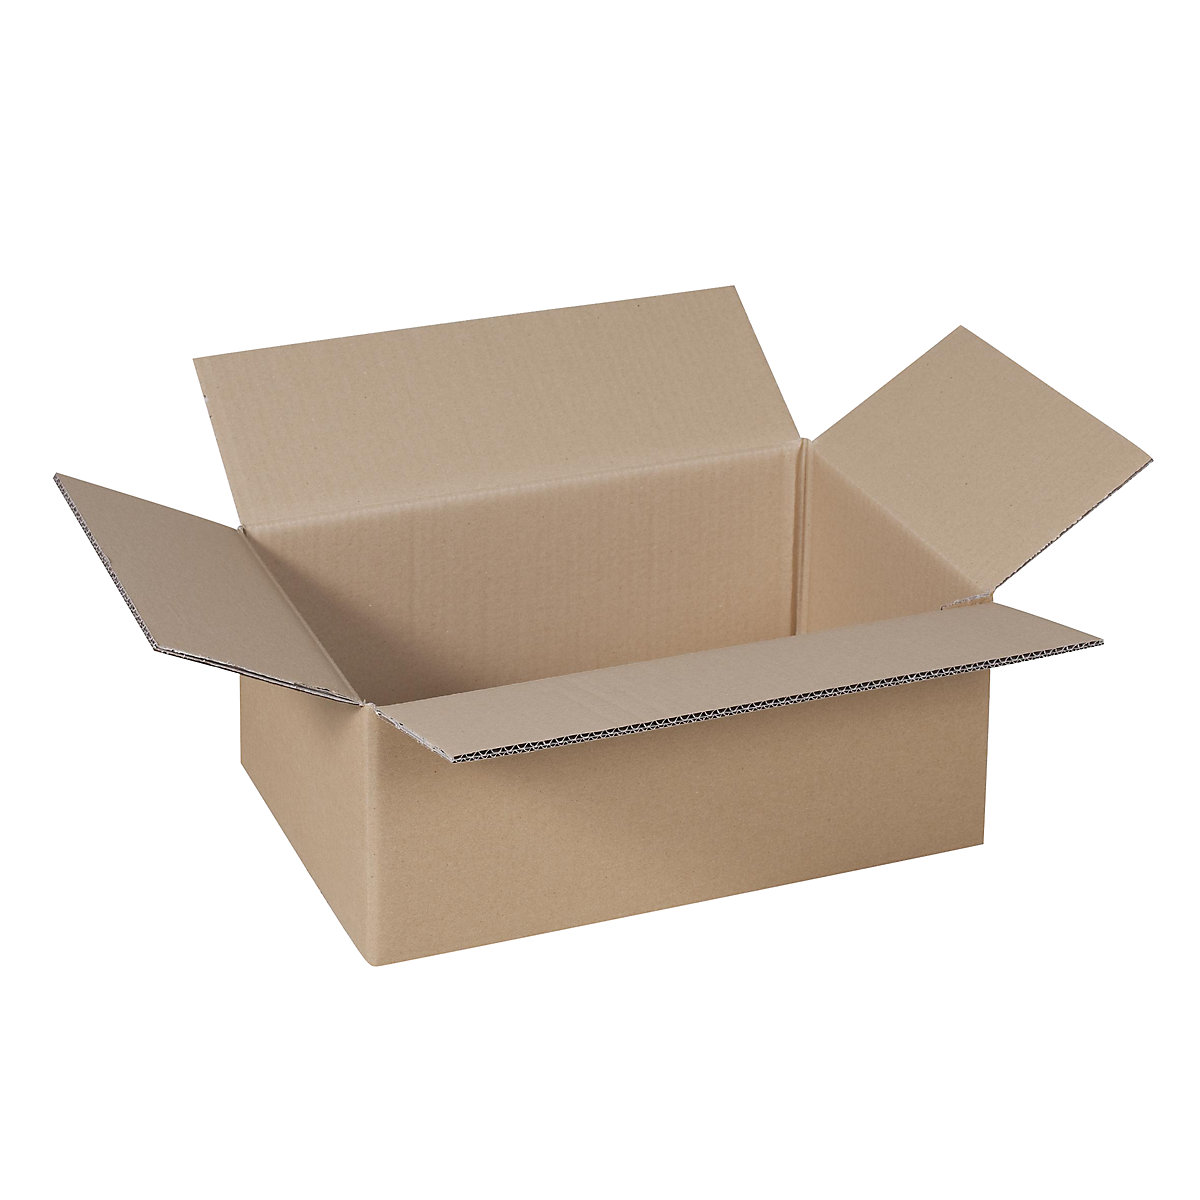 Folding cardboard box, FEFCO 0201, made of double fluted cardboard, internal dimensions 605 x 455 x 180 mm, pack of 50-37